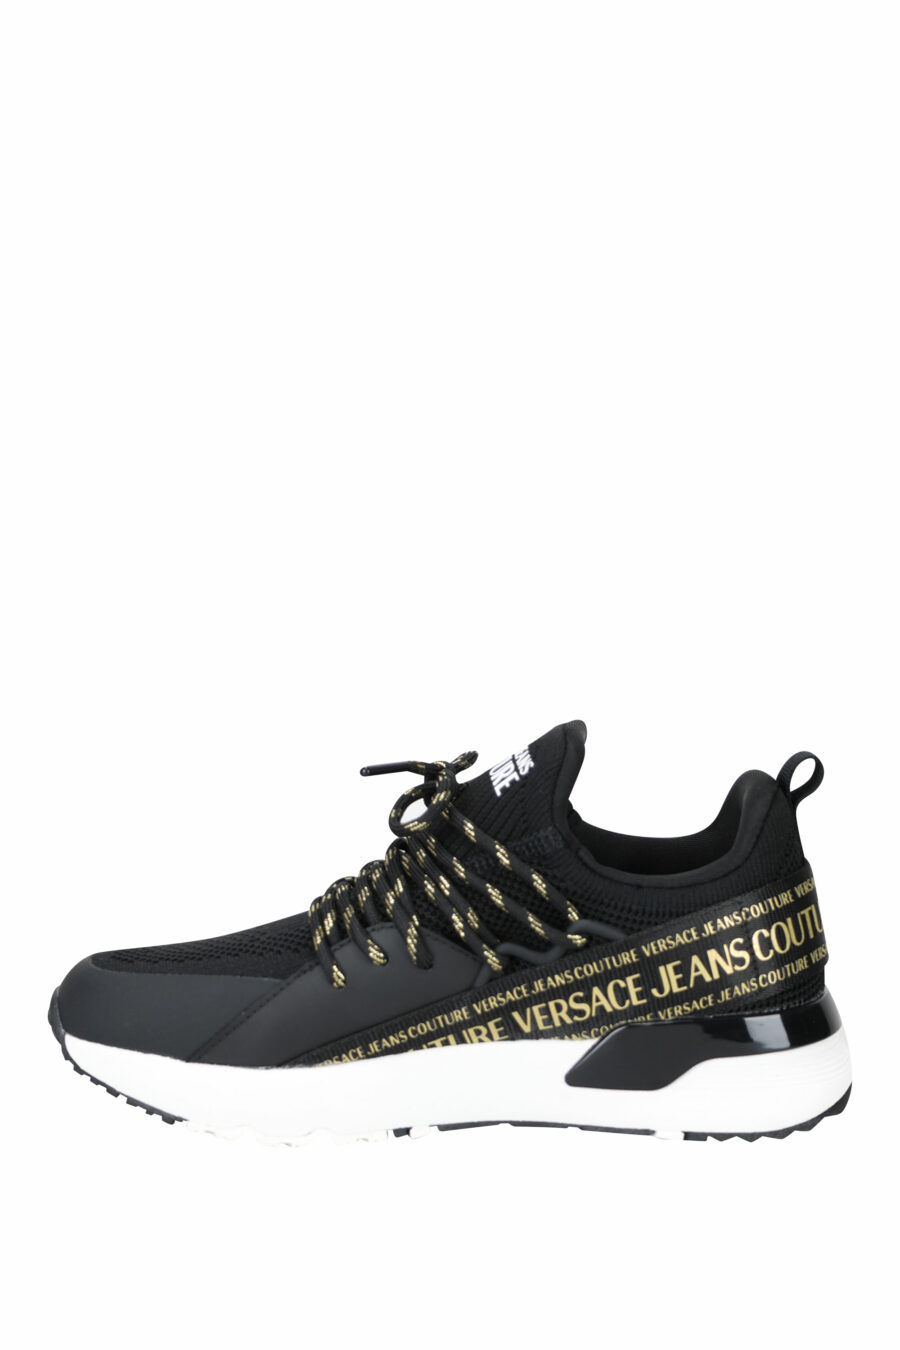 Black "troadlop" trainers with gold ribbon logo - 8052019454222 2